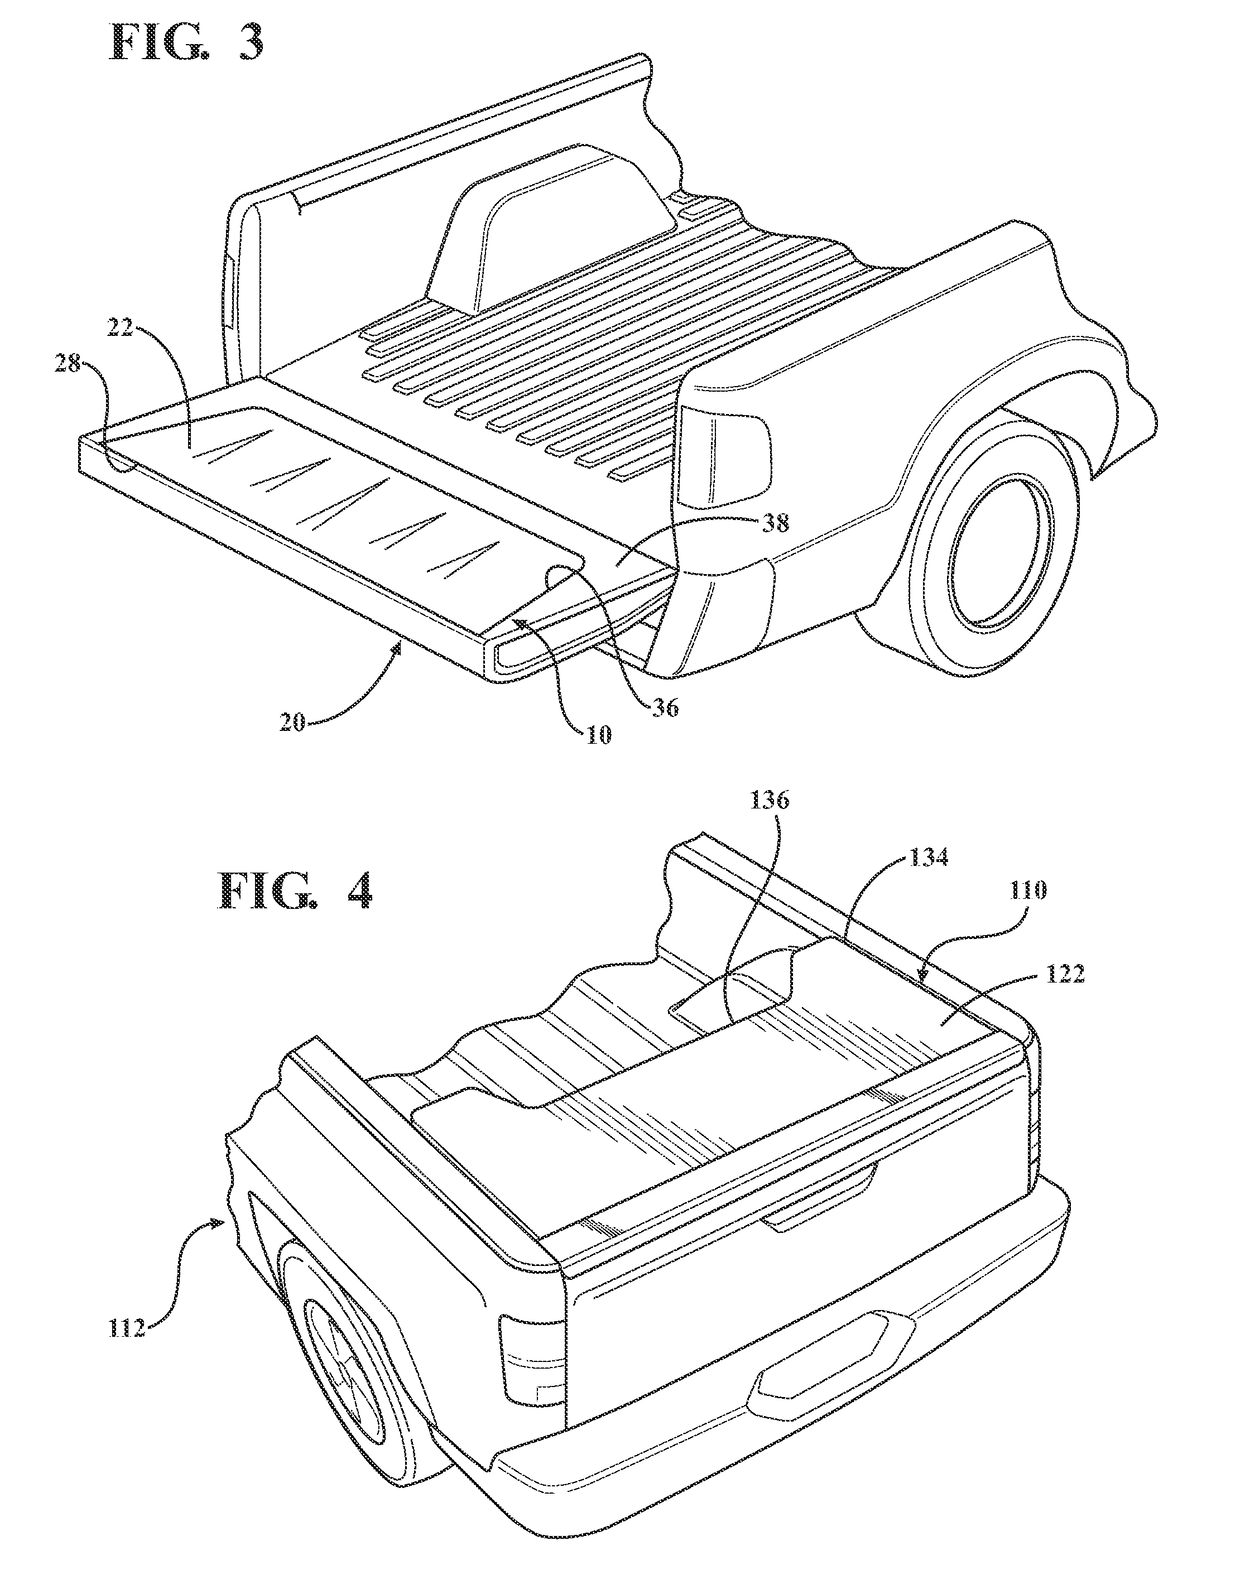 Deployable aerodynamic bed cover system